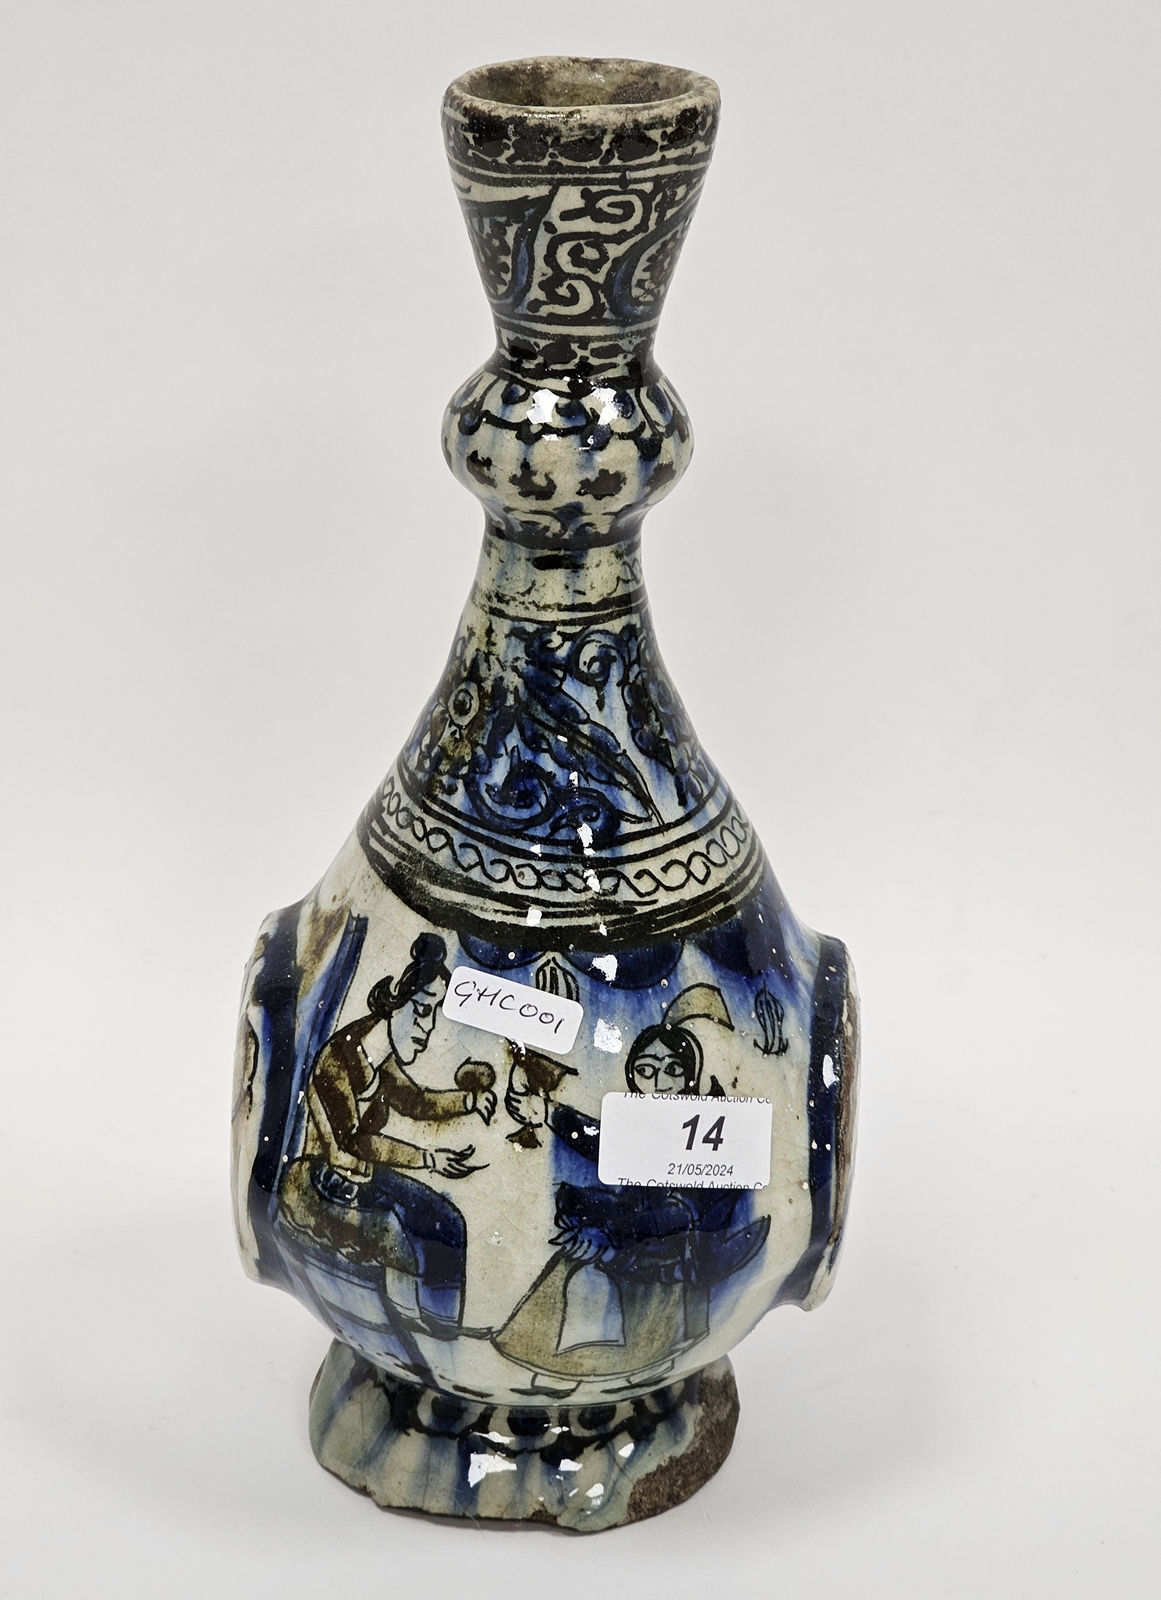 19th century Persian bottle-shaped vase with flared bulbous neck, painted with equestrian figures, - Image 3 of 5